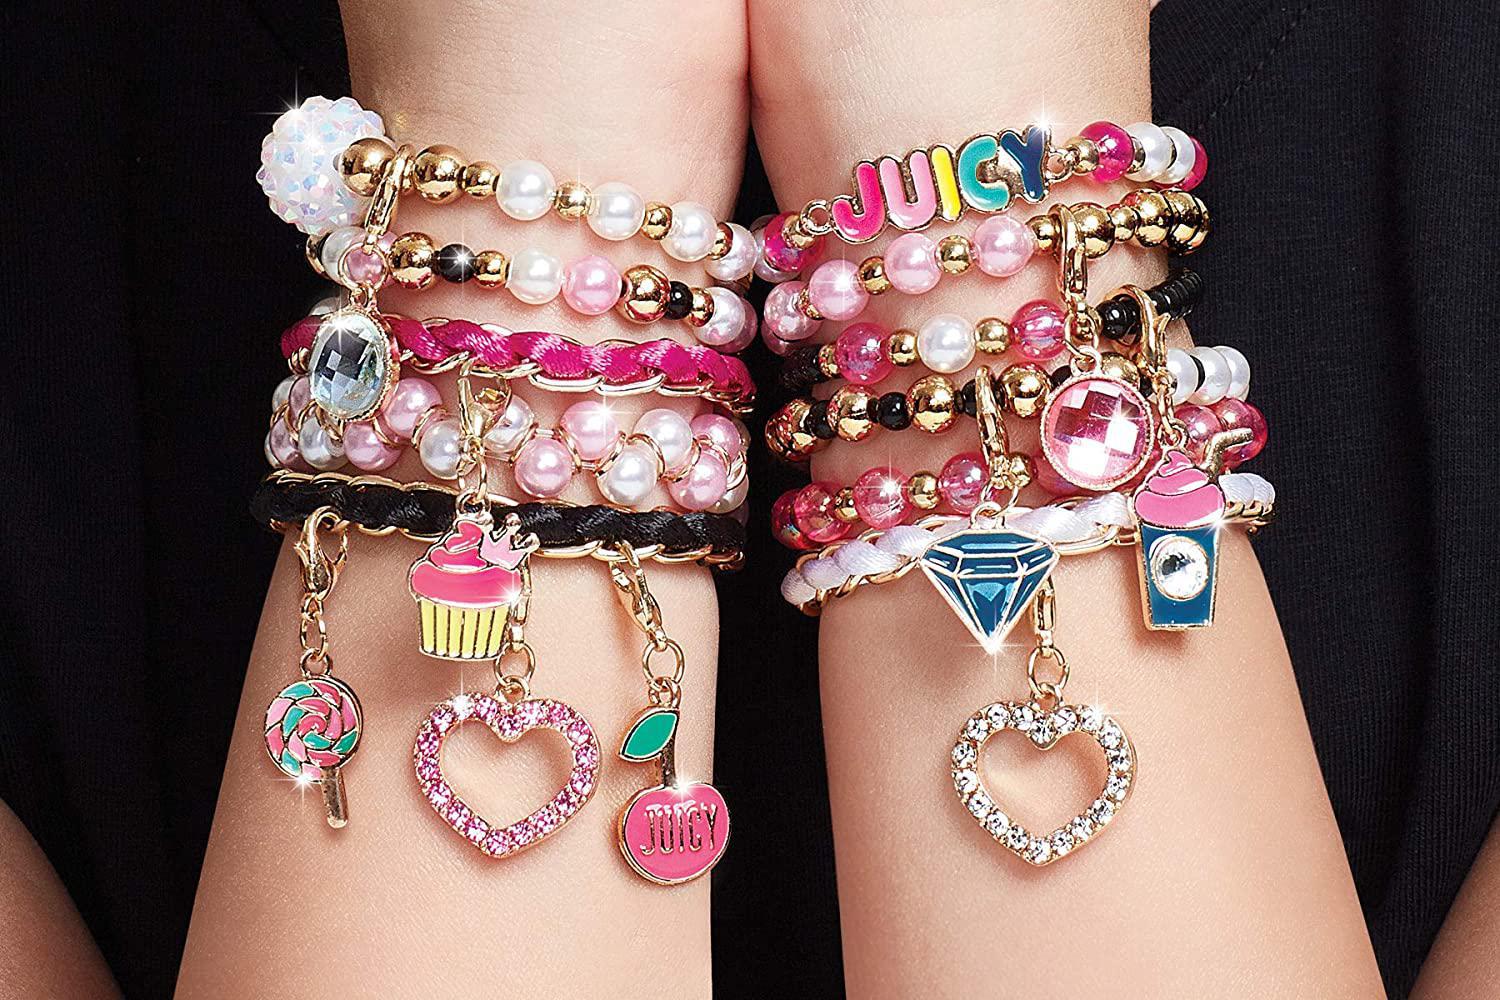 Juicy Couture Glamour Stacks Bracelets - TOYSTER Singapore – Toyster